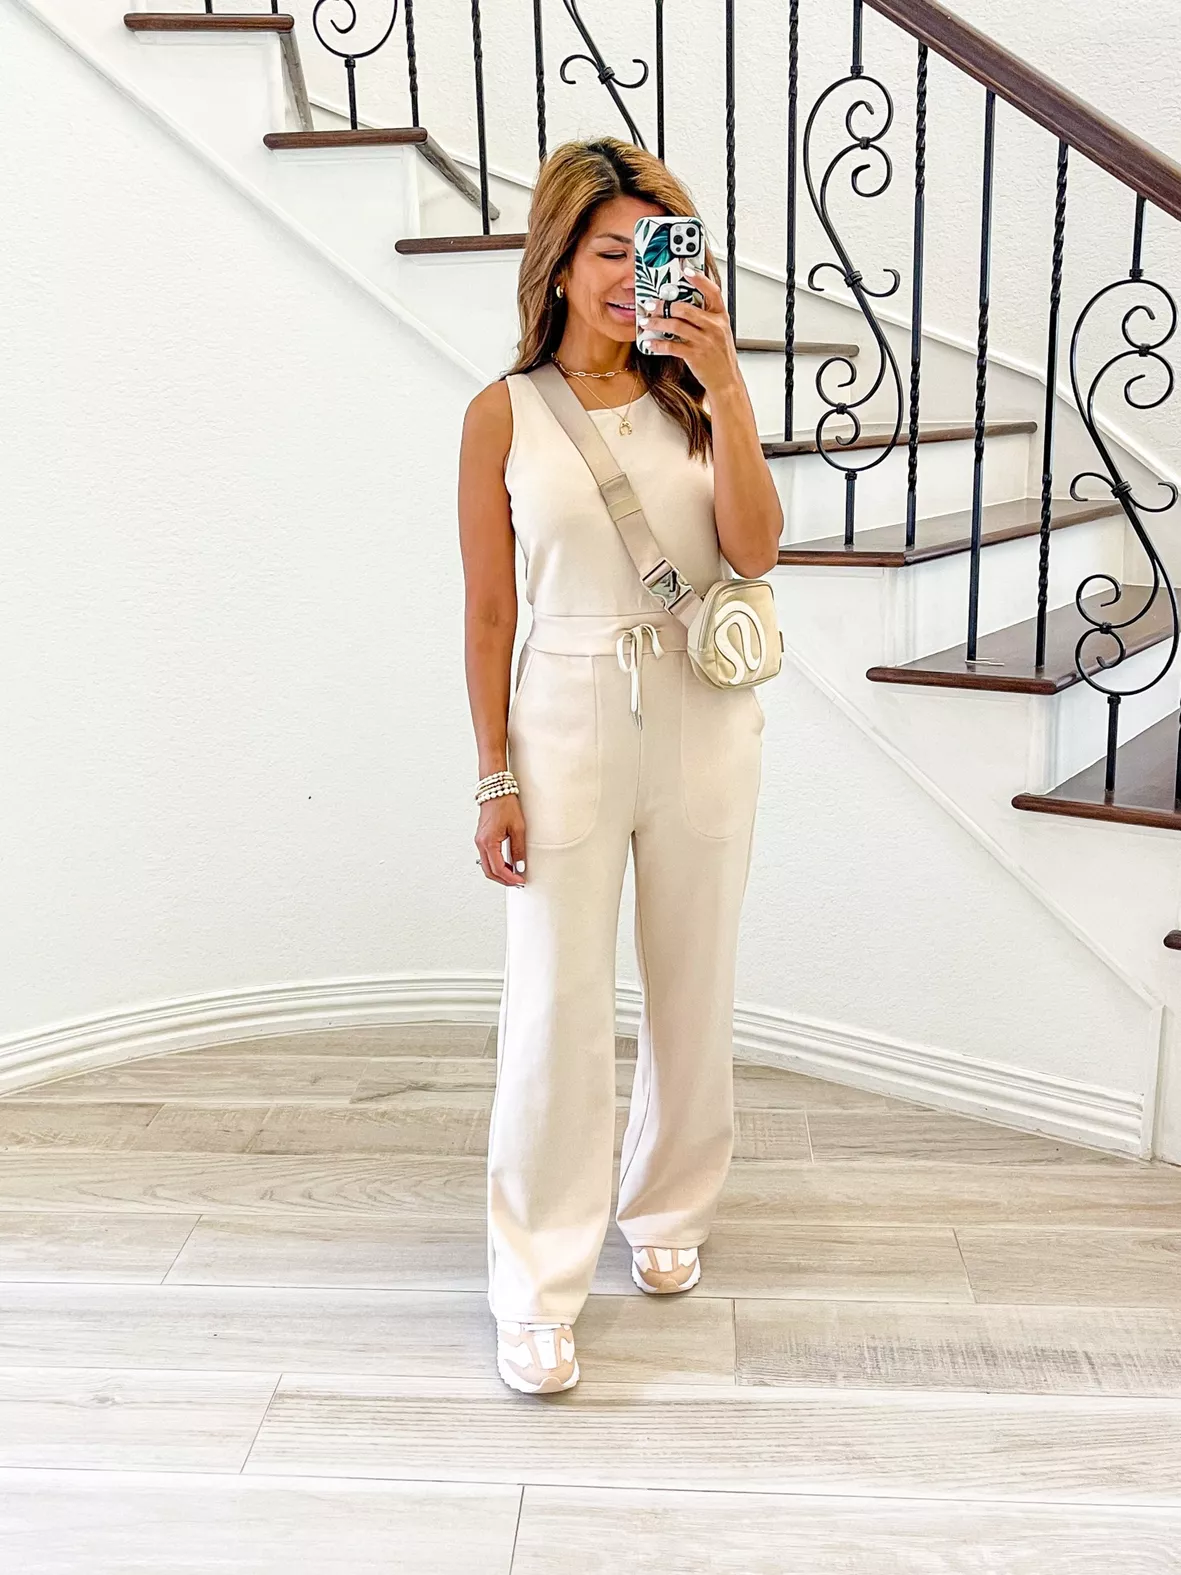 AirEssentials Jumpsuit curated on LTK